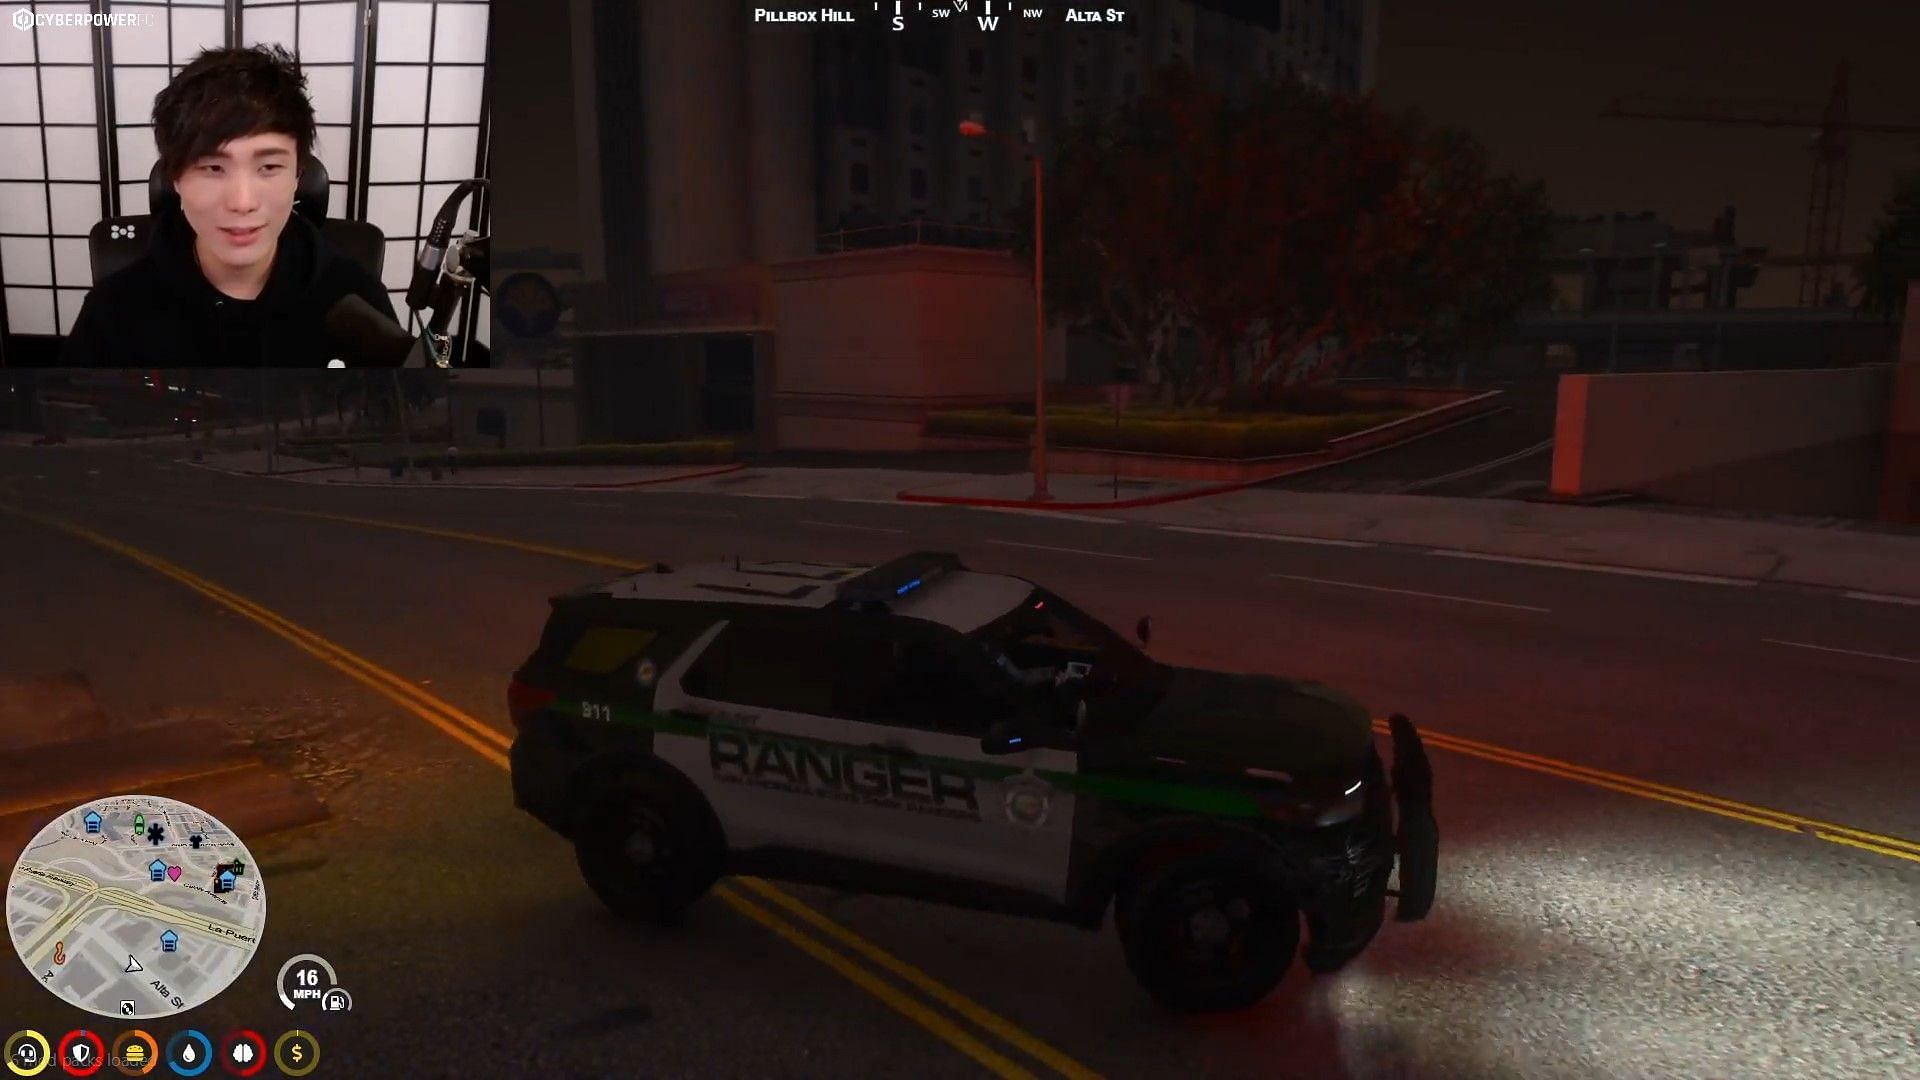 Arrested Sykkuno marvels at the lack of teamwork shown by the police in NoPixel GTA RP server (Image via Twitch/Sykkuno)